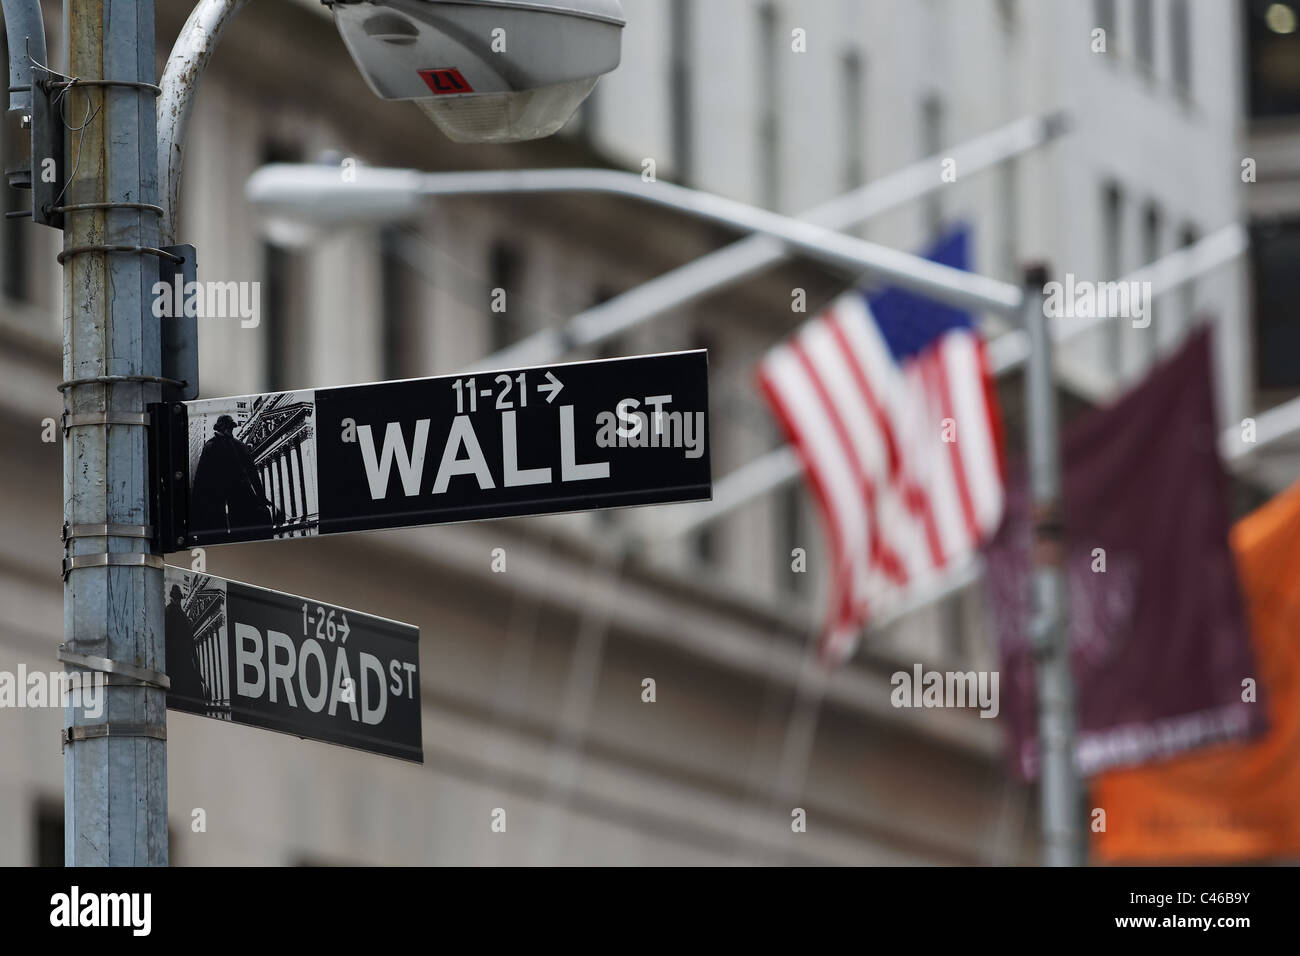 Wall street in the financial district,  lower Manhattan, New York City. Stock Photo